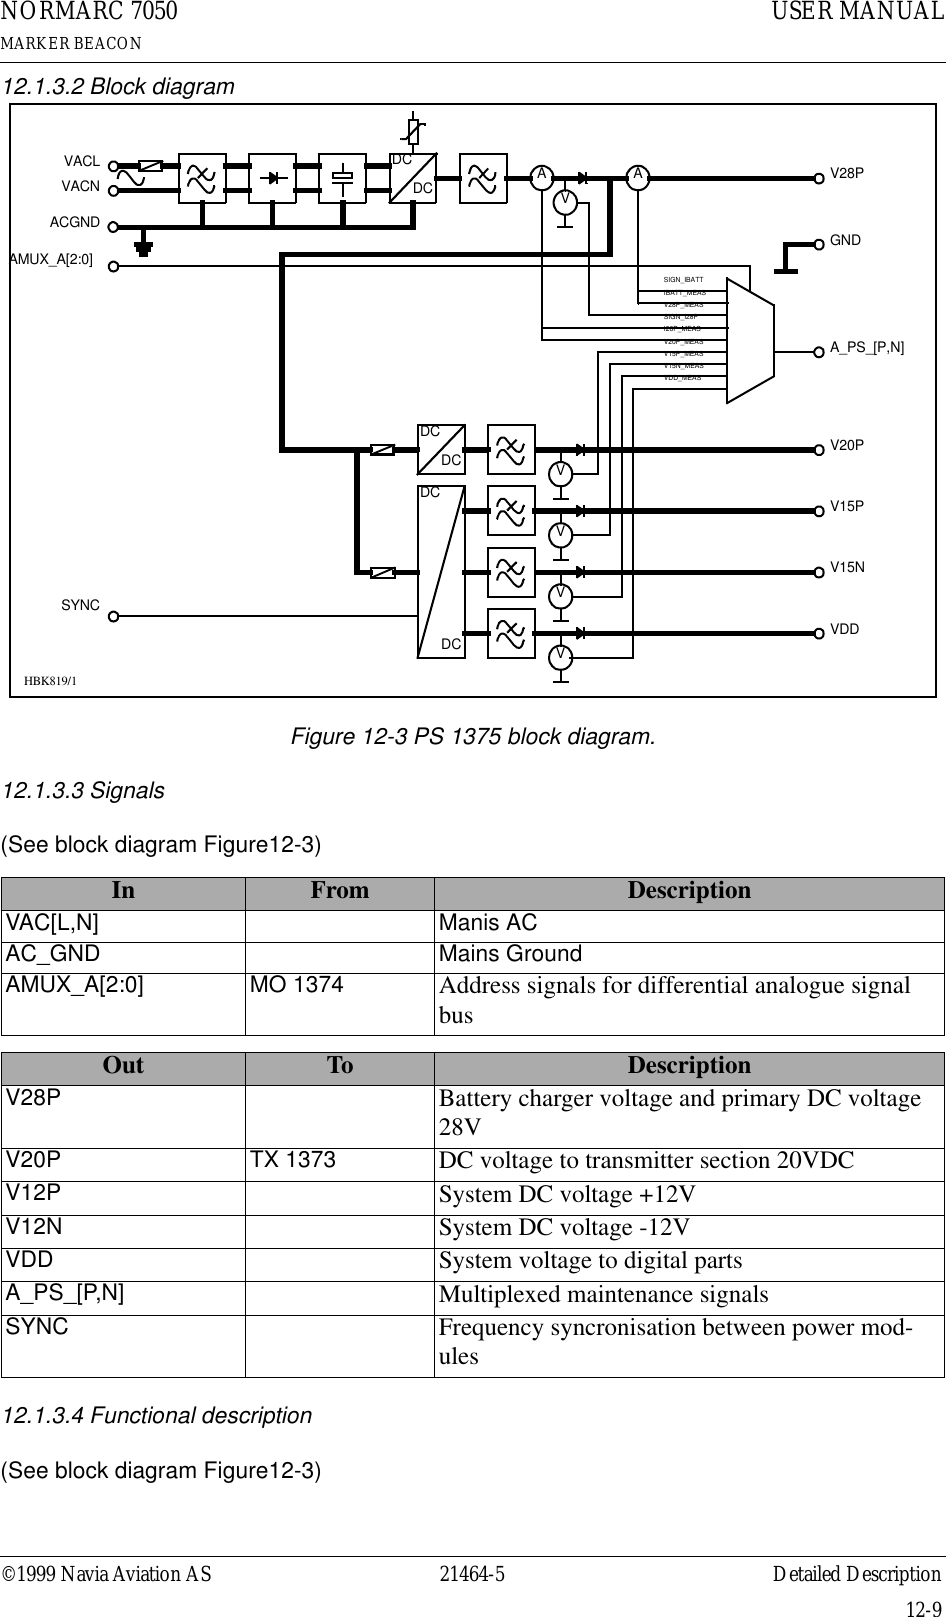 ©1999 Navia Aviation AS 21464-5 Detailed DescriptionUSER MANUALNORMARC 7050MARKER BEACON12-912.1.3.2 Block diagramFigure 12-3 PS 1375 block diagram.12.1.3.3 Signals(See block diagram Figure12-3)12.1.3.4 Functional description (See block diagram Figure12-3)In From DescriptionVAC[L,N] Manis ACAC_GND Mains GroundAMUX_A[2:0] MO 1374 Address signals for differential analogue signal busOut To DescriptionV28P Battery charger voltage and primary DC voltage 28VV20P TX 1373 DC voltage to transmitter section 20VDCV12P System DC voltage +12VV12N System DC voltage -12VVDD System voltage to digital partsA_PS_[P,N] Multiplexed maintenance signalsSYNC Frequency syncronisation between power mod-ulesDCDCDCDCDCVA AVVVVVACLVACNACGNDV20PV20P_MEASV15PV15P_MEASV15NV15N_MEASVDDVDD_MEASIBATT_MEASV28PV28P_MEASI28P_MEASGNDDCAMUX_A[2:0]A_PS_[P,N]SYNCSIGN_IBATTSIGN_I28PHBK819/1